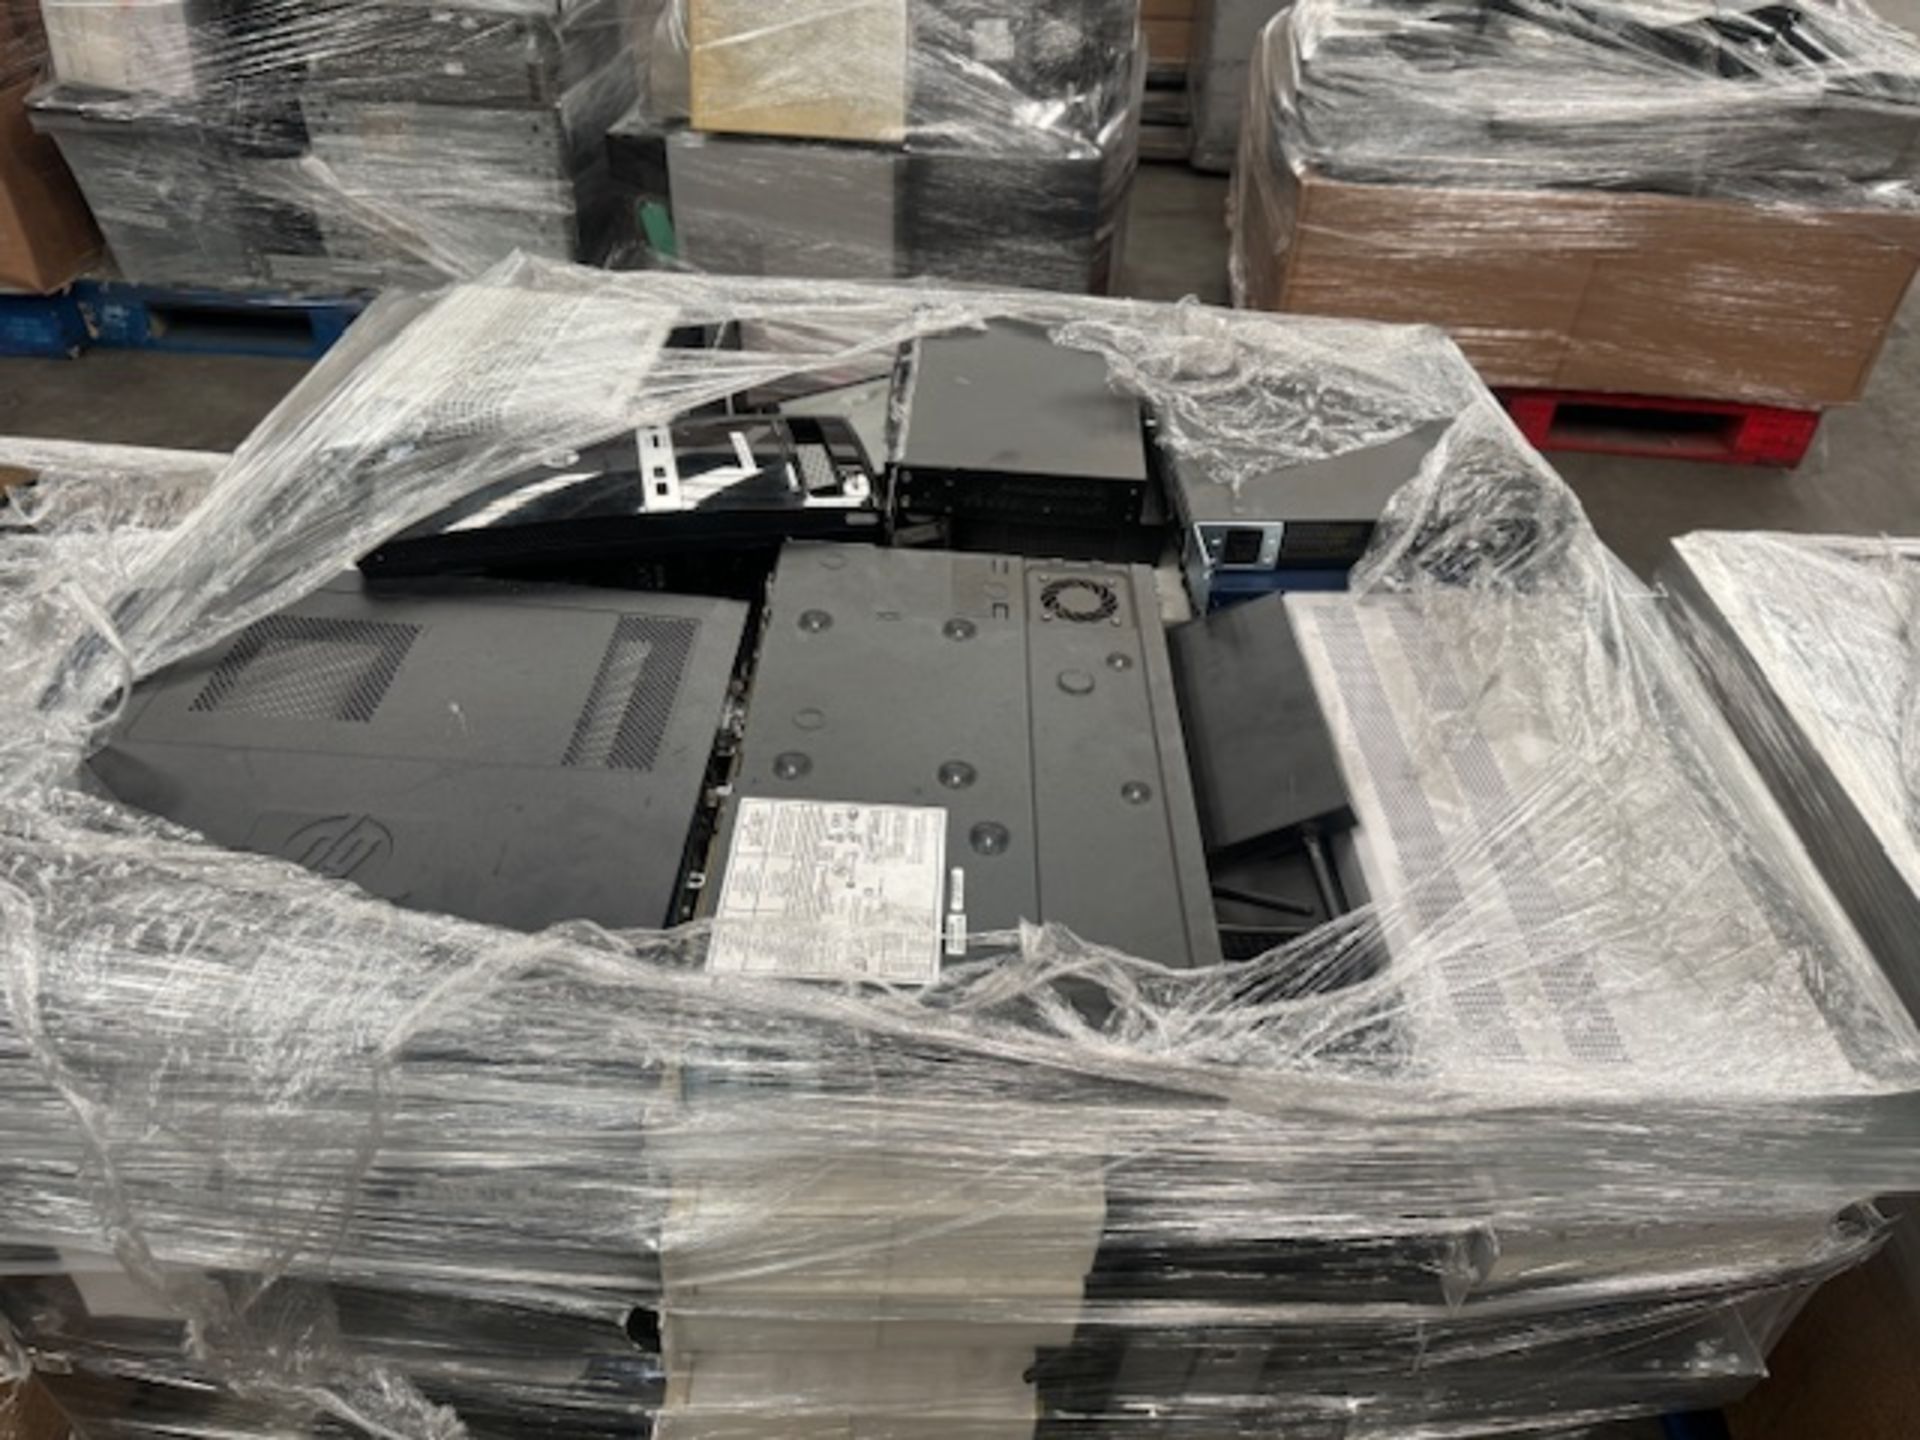 IT PALLET LOT INCLUDING CISCO ROUTERS, LENOVO PC COMPUTERS, AMPLIFIERS ETC COST NEW 16K - Image 3 of 3